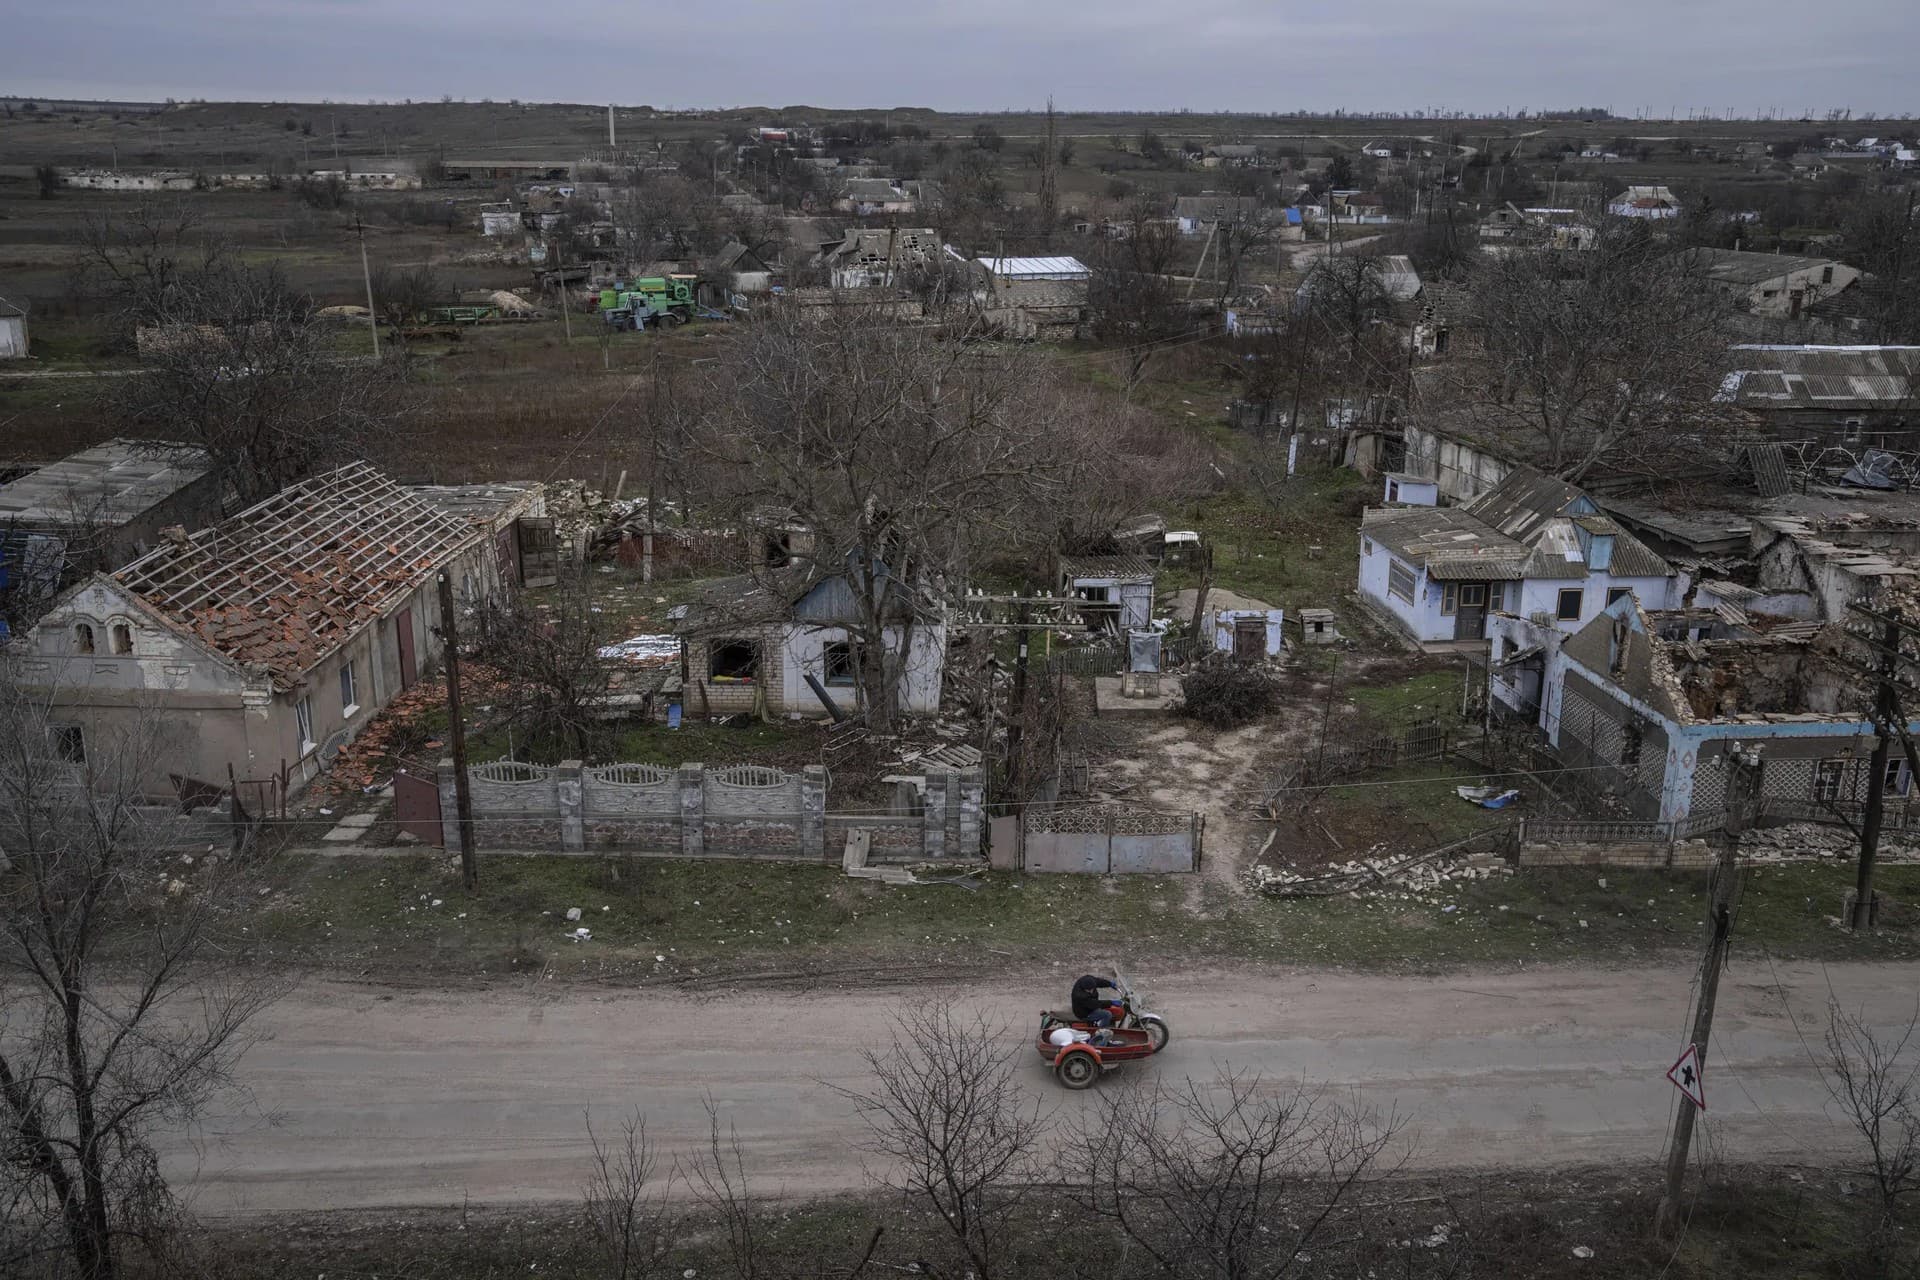 A man rides a motorbike in front of houses which have been destroyed during the fighting between Russian and Ukrainian forces in the recently liberated town of Arhanhelske